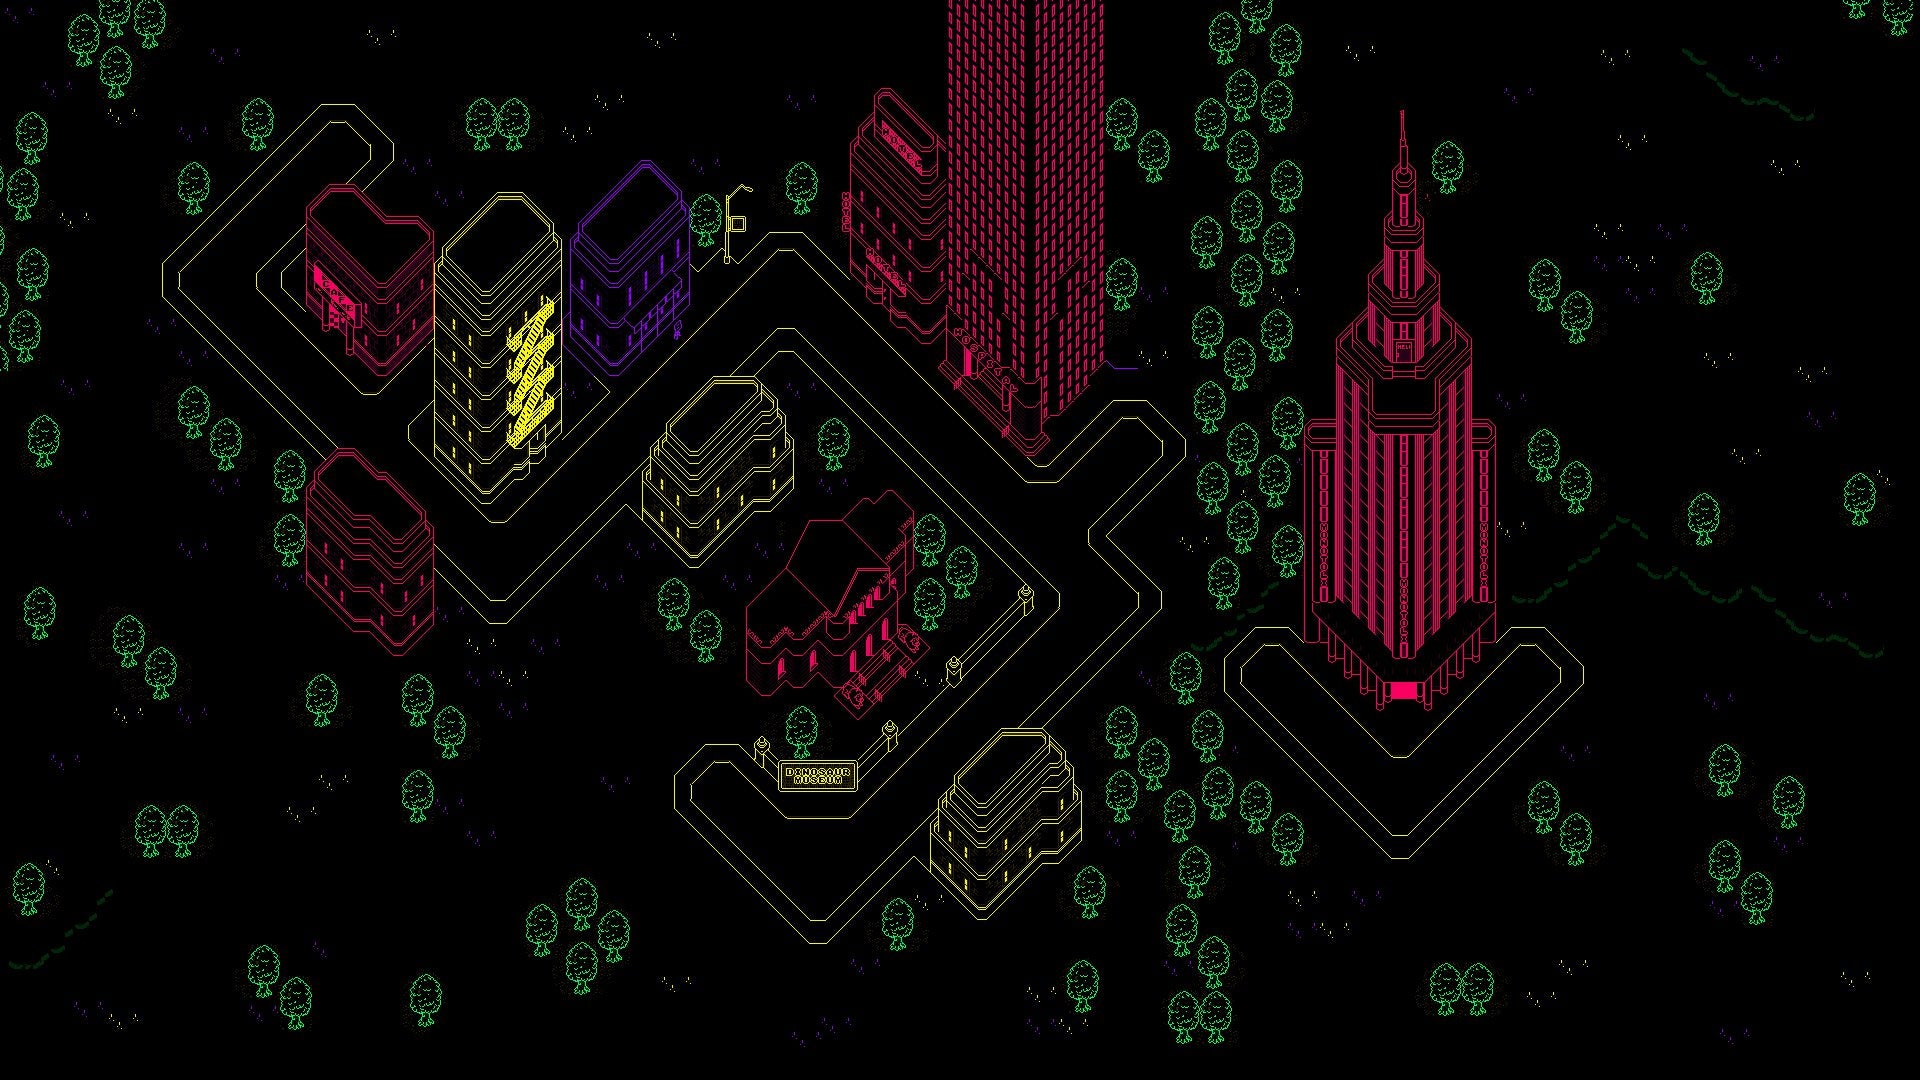 The moonside map from Earthbound